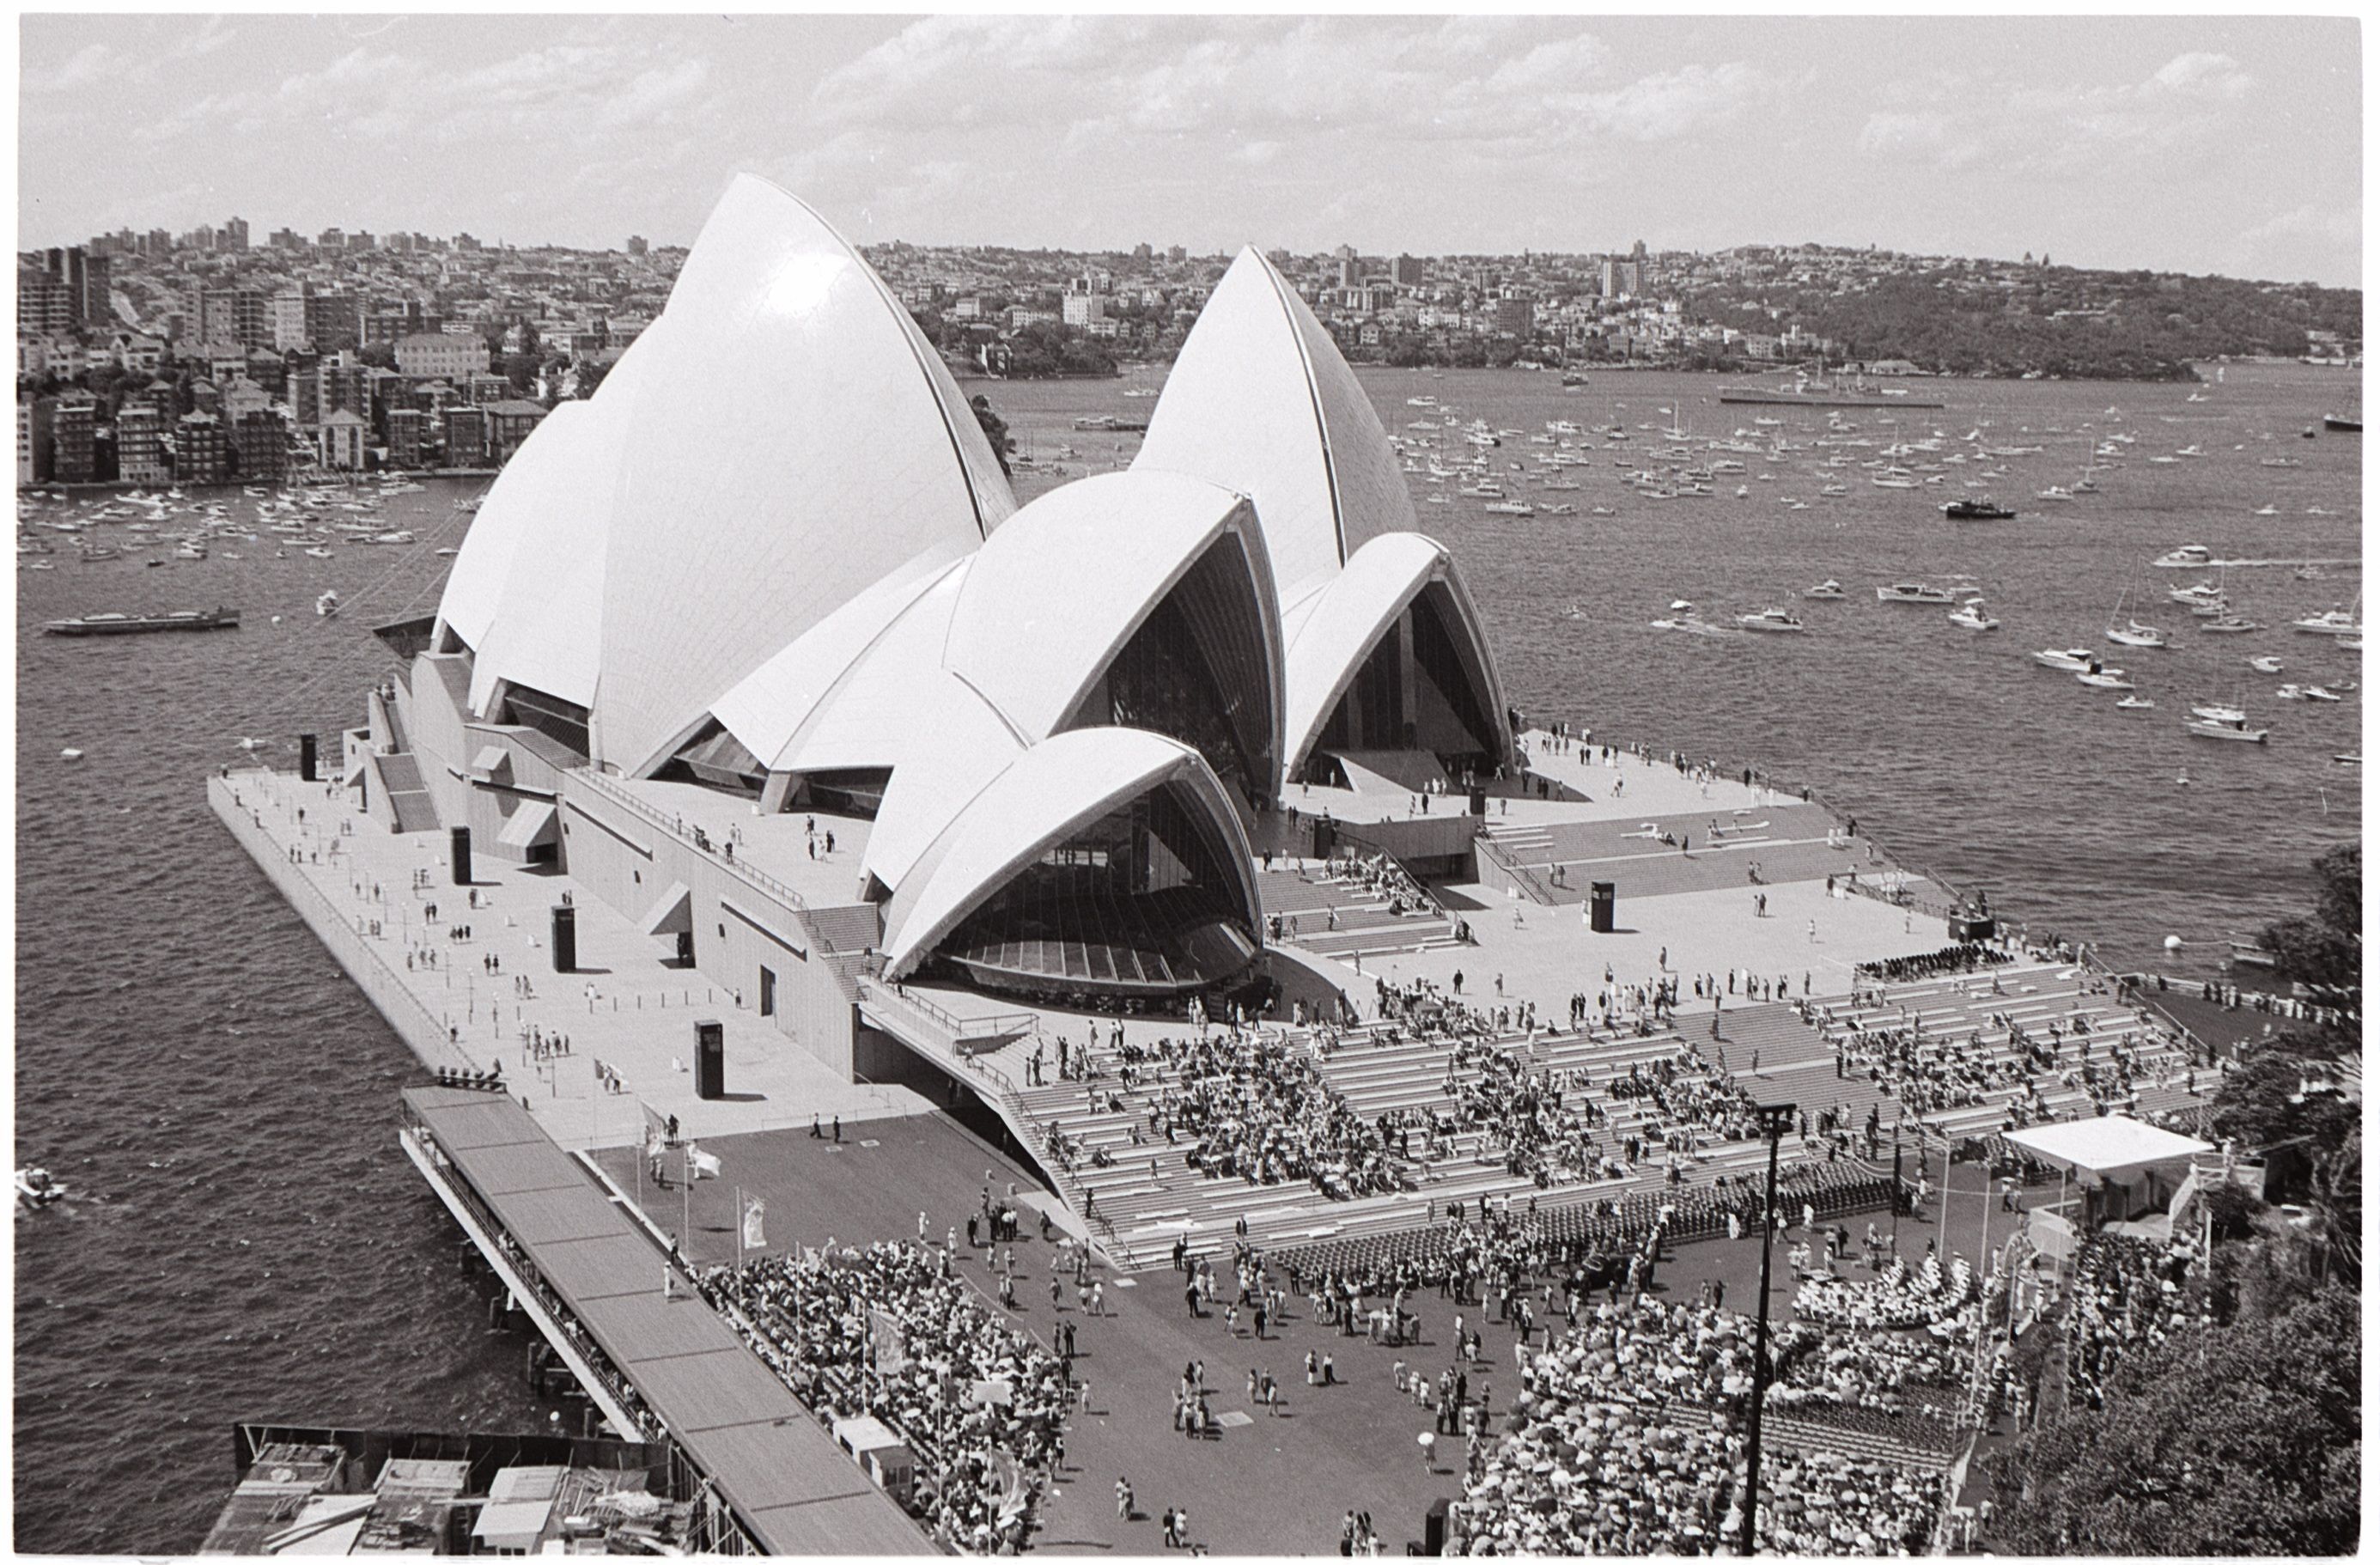 Crowds begin to take their places before the arrival of HM the Queen to open the Sydney Opera House, October 20, 1973